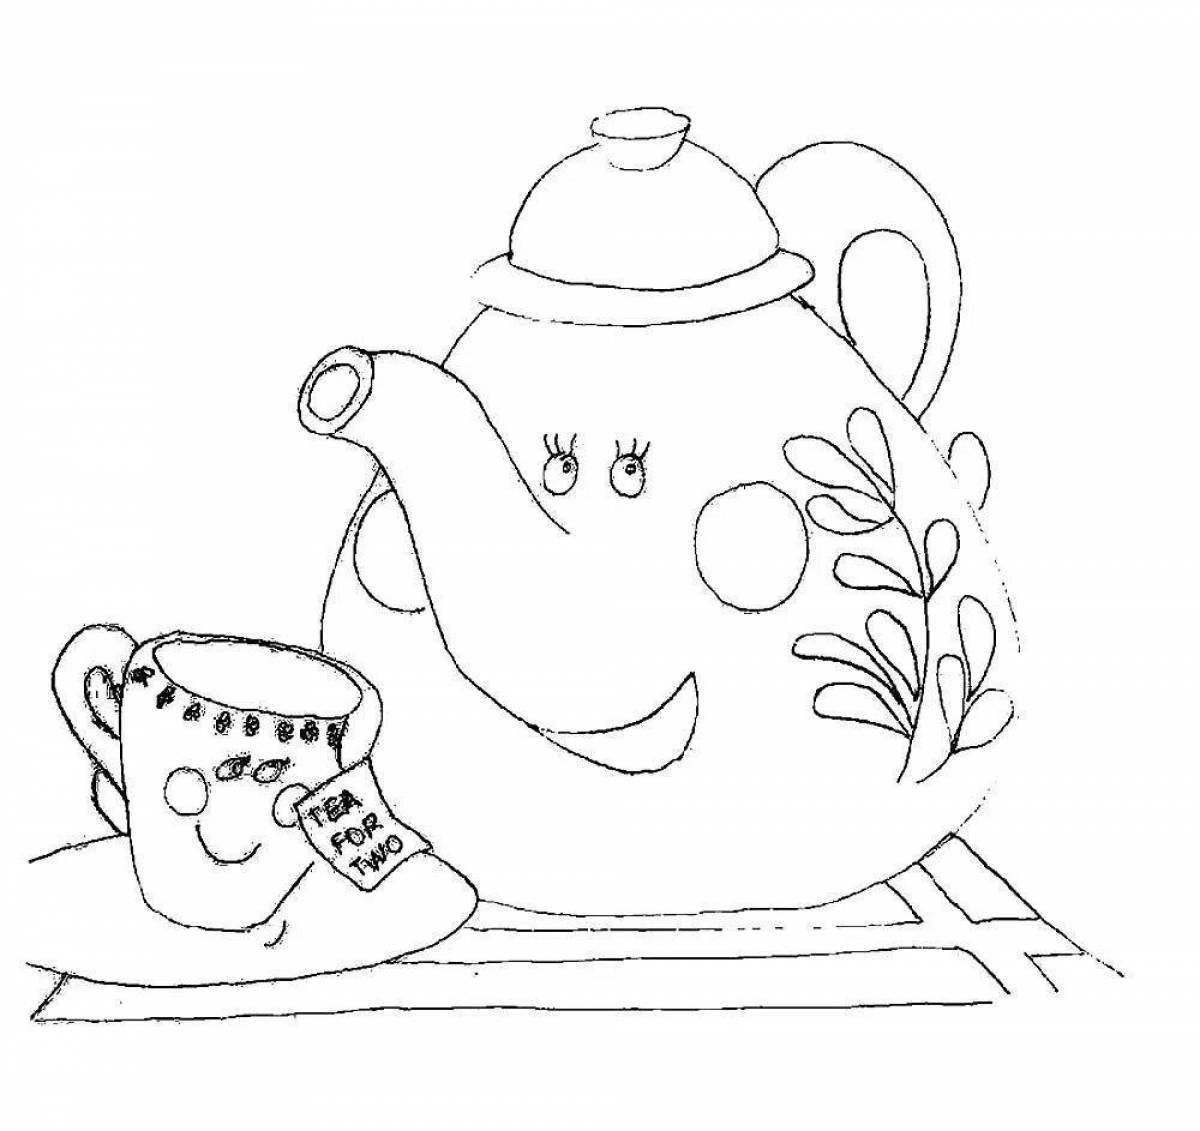 Playful coloring book with teapot and cup for toddlers